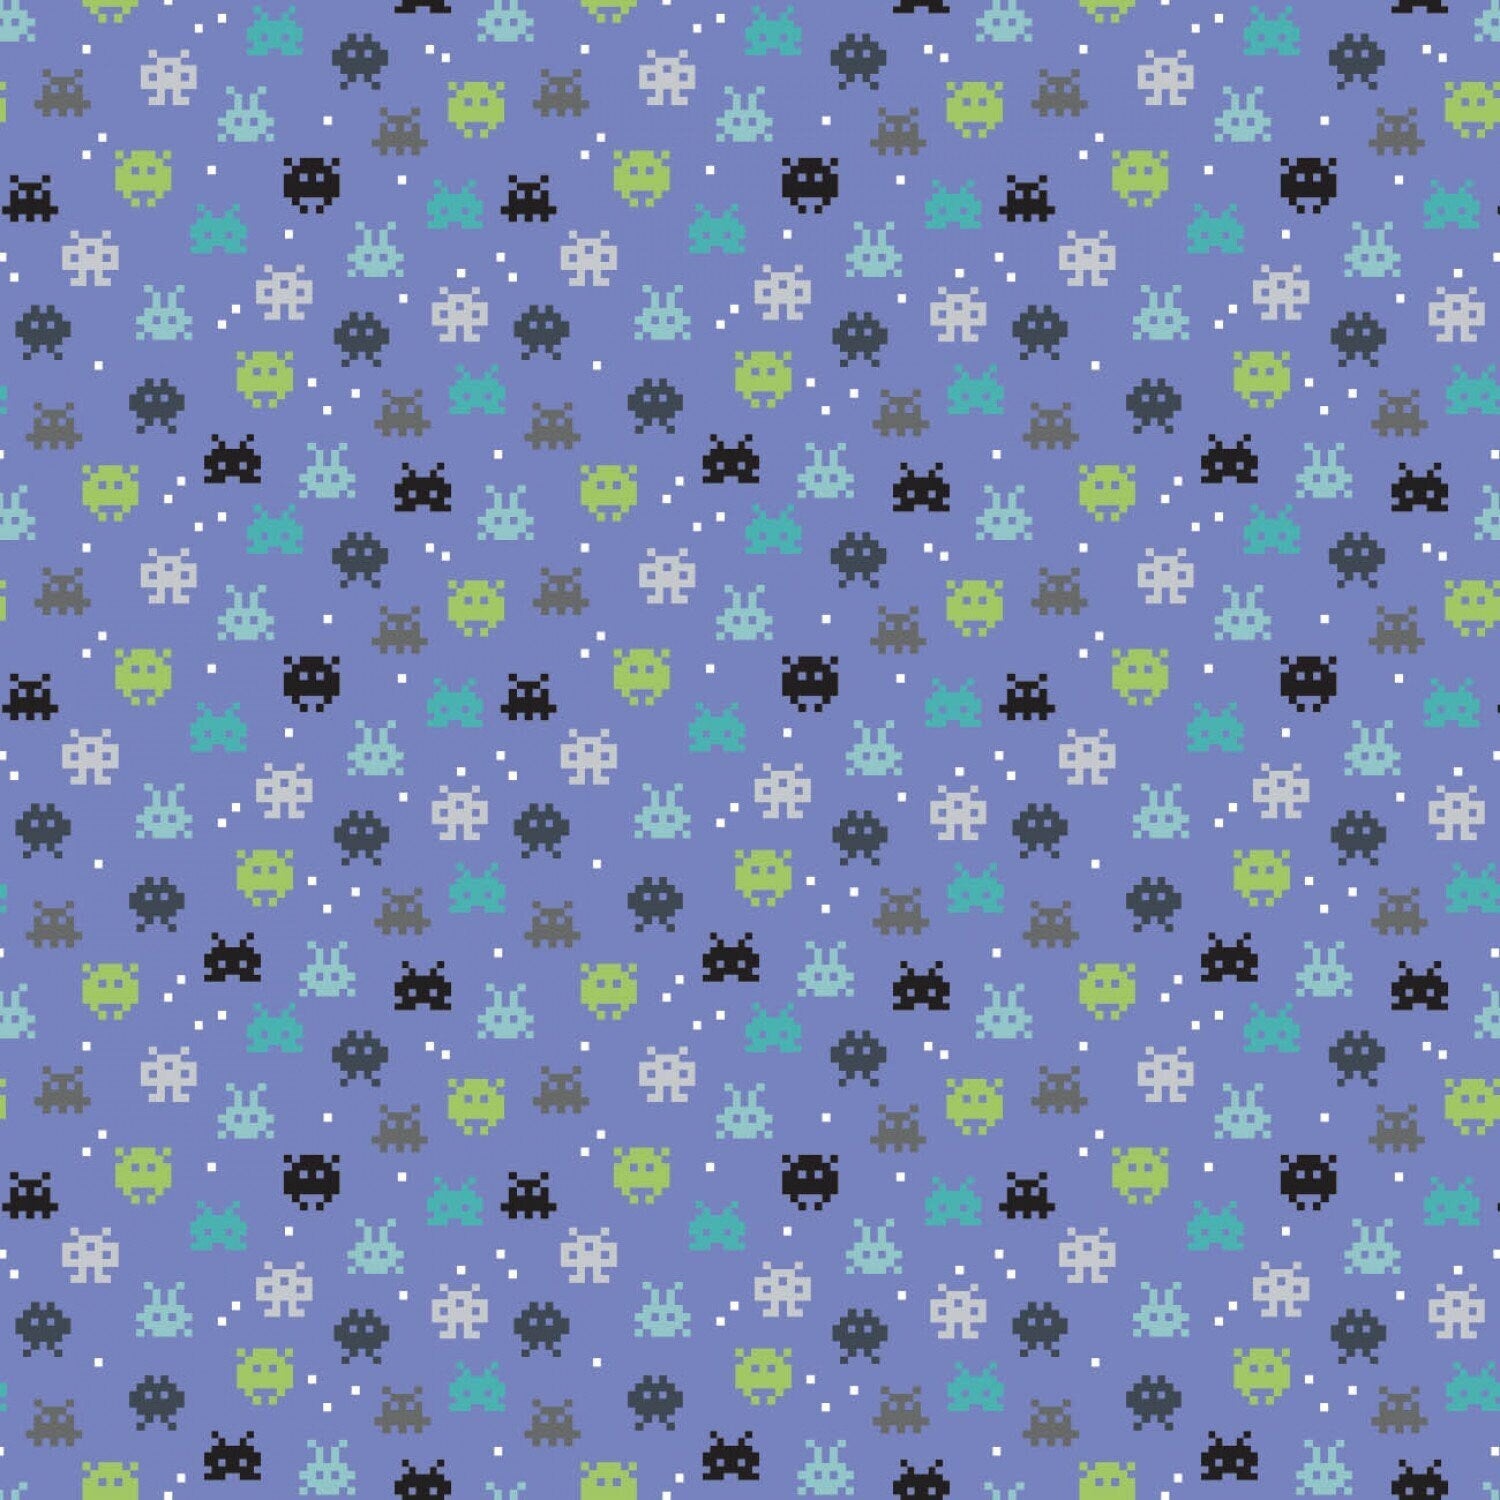 Gaming Fabric - 80s Arcade Collection - 8 bit Periwinkle - 100% cotton fabric - Camelot Fabrics - retro gamer print theme - SHIPS NEXT Day